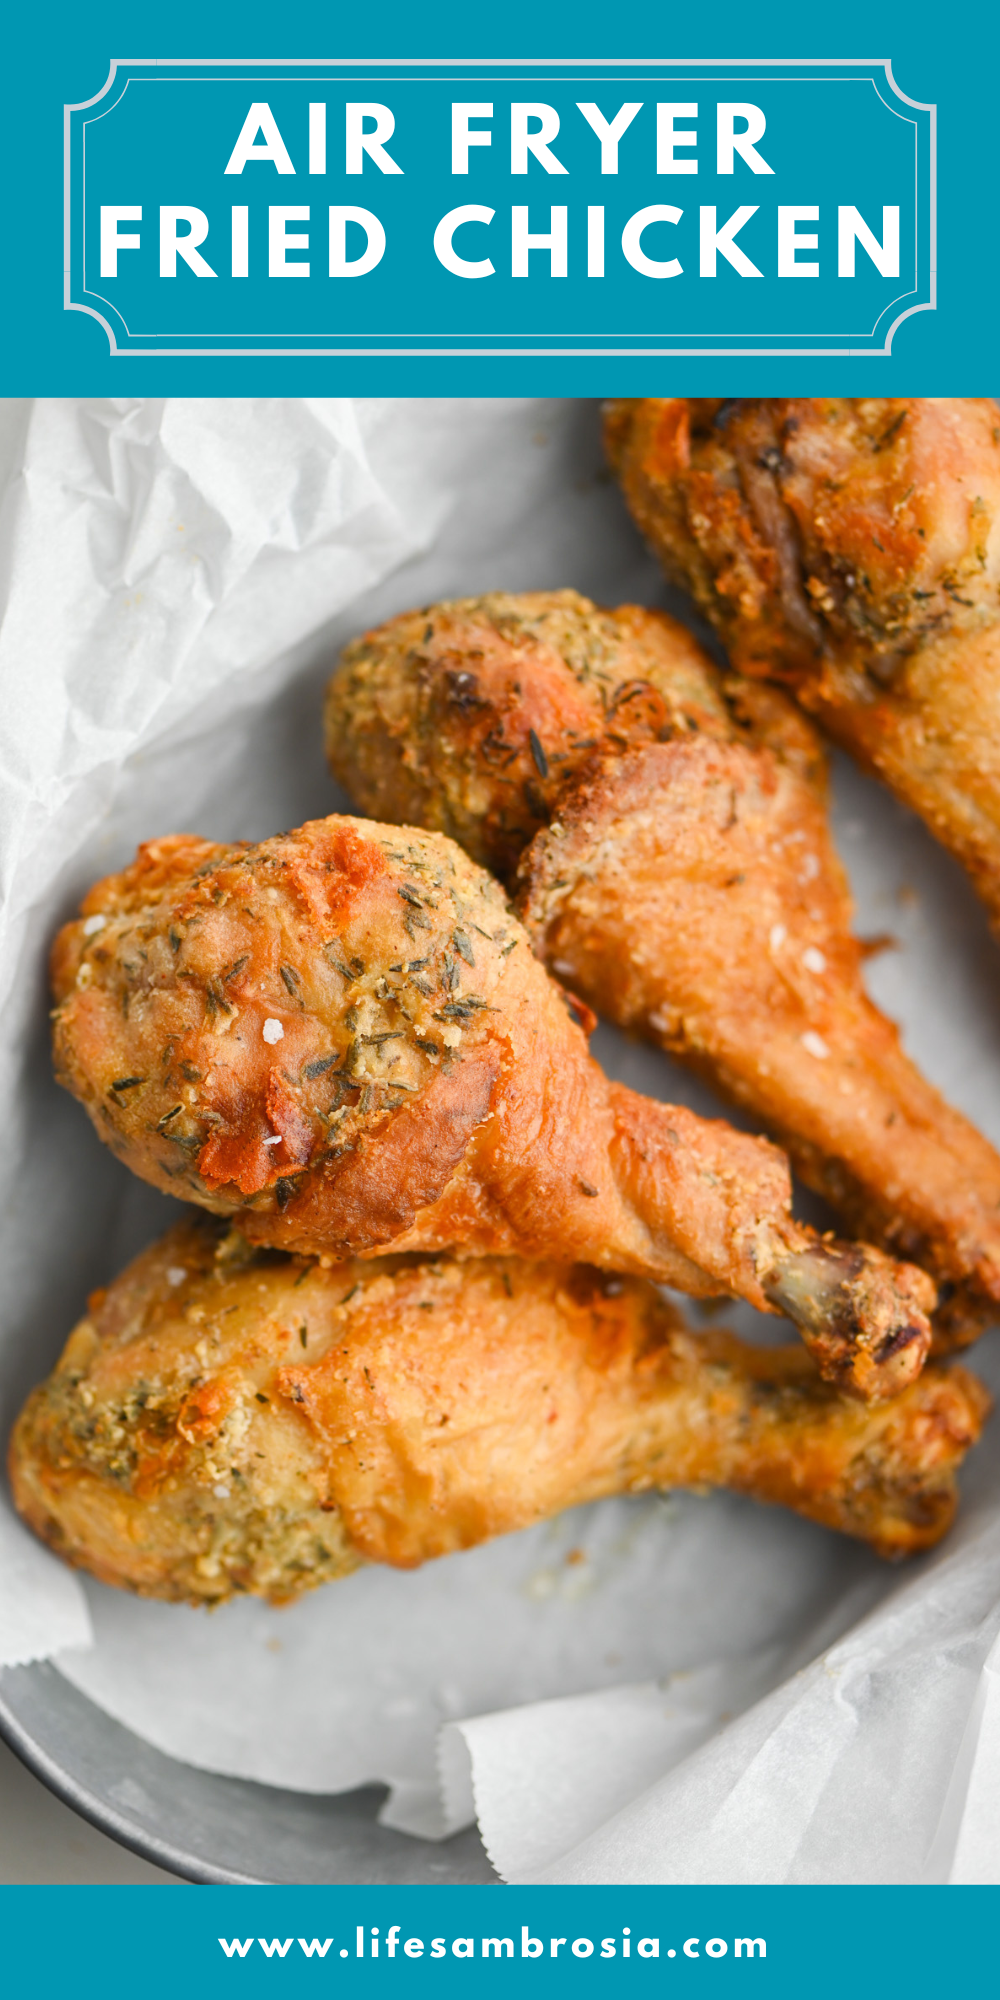 Air Fryer Fried Chicken Recipe - Life's Ambrosia